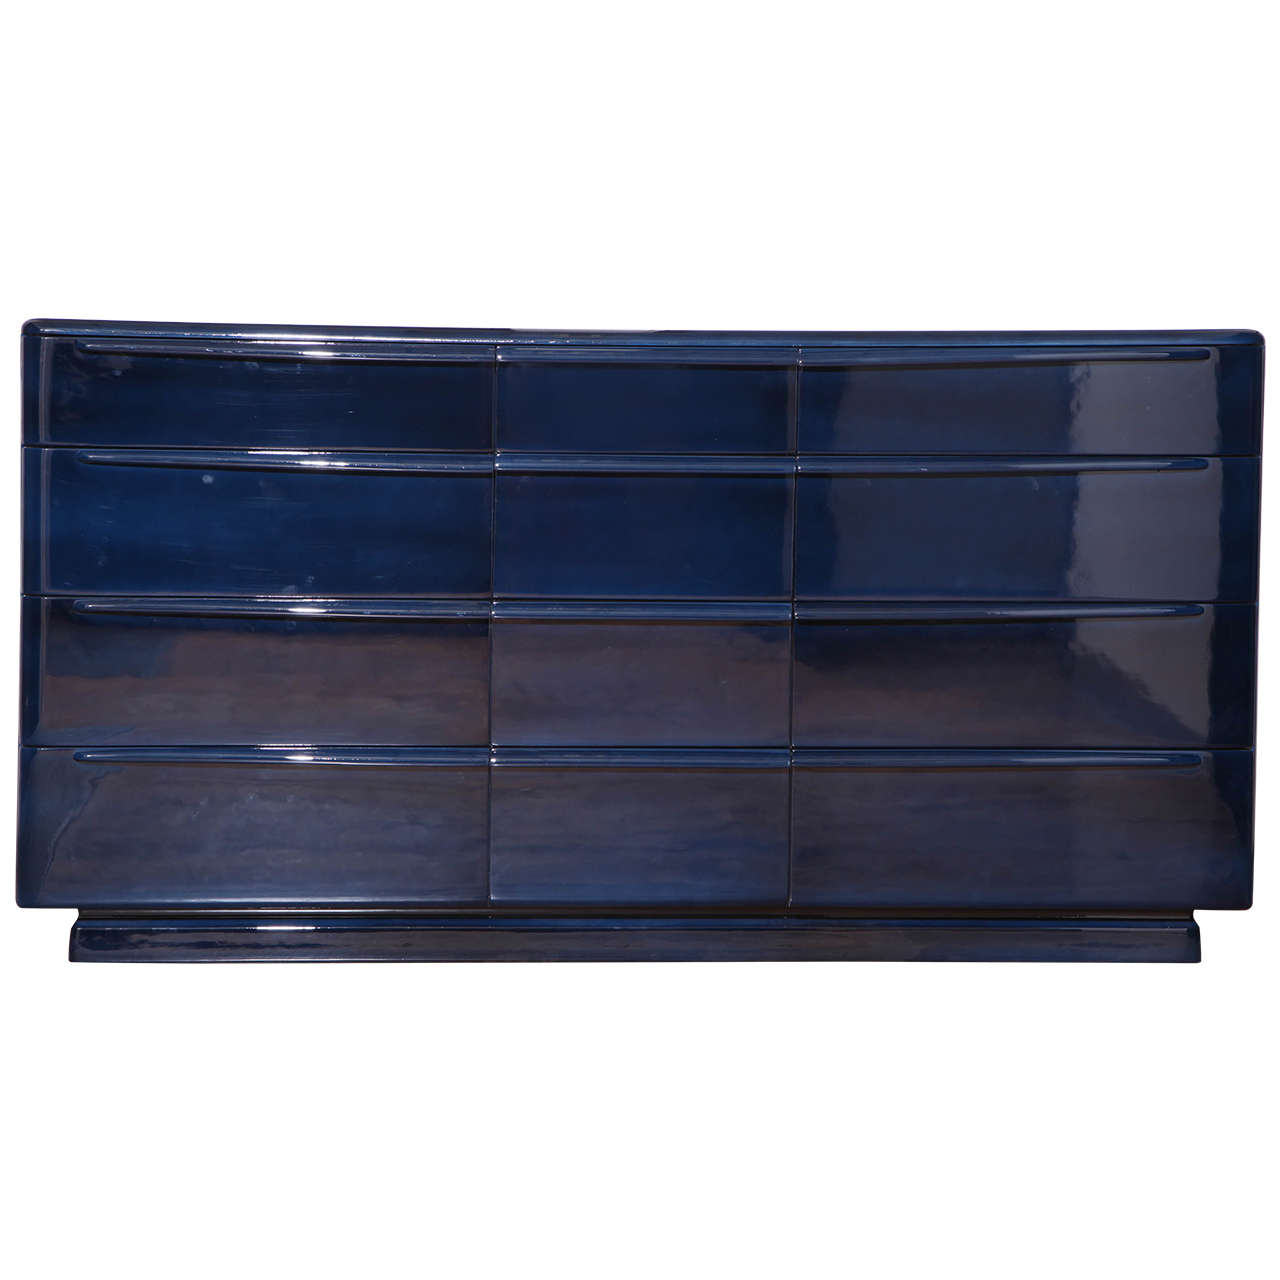 Sideboard or Chest of Drawers Lacquered in Midnight Blue by Heywood-Wakefield